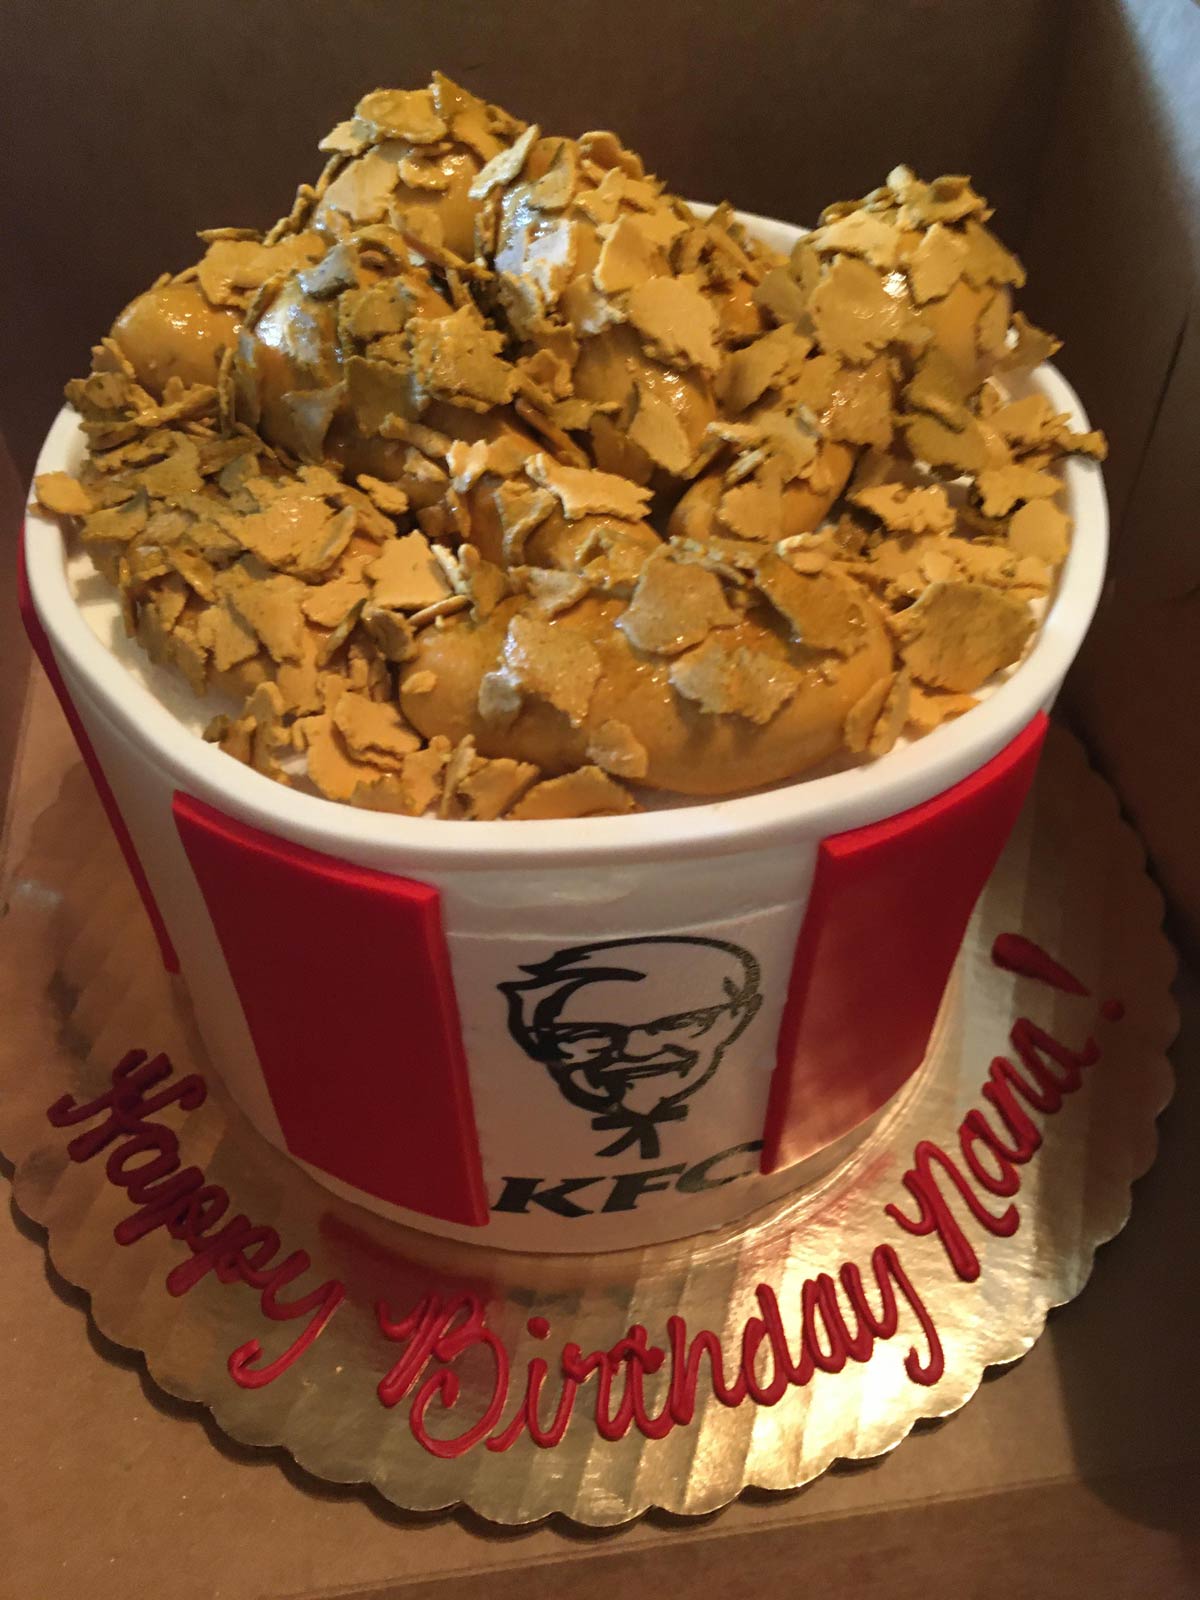 My grandma loves KFC so for her 90th I had a special cake made